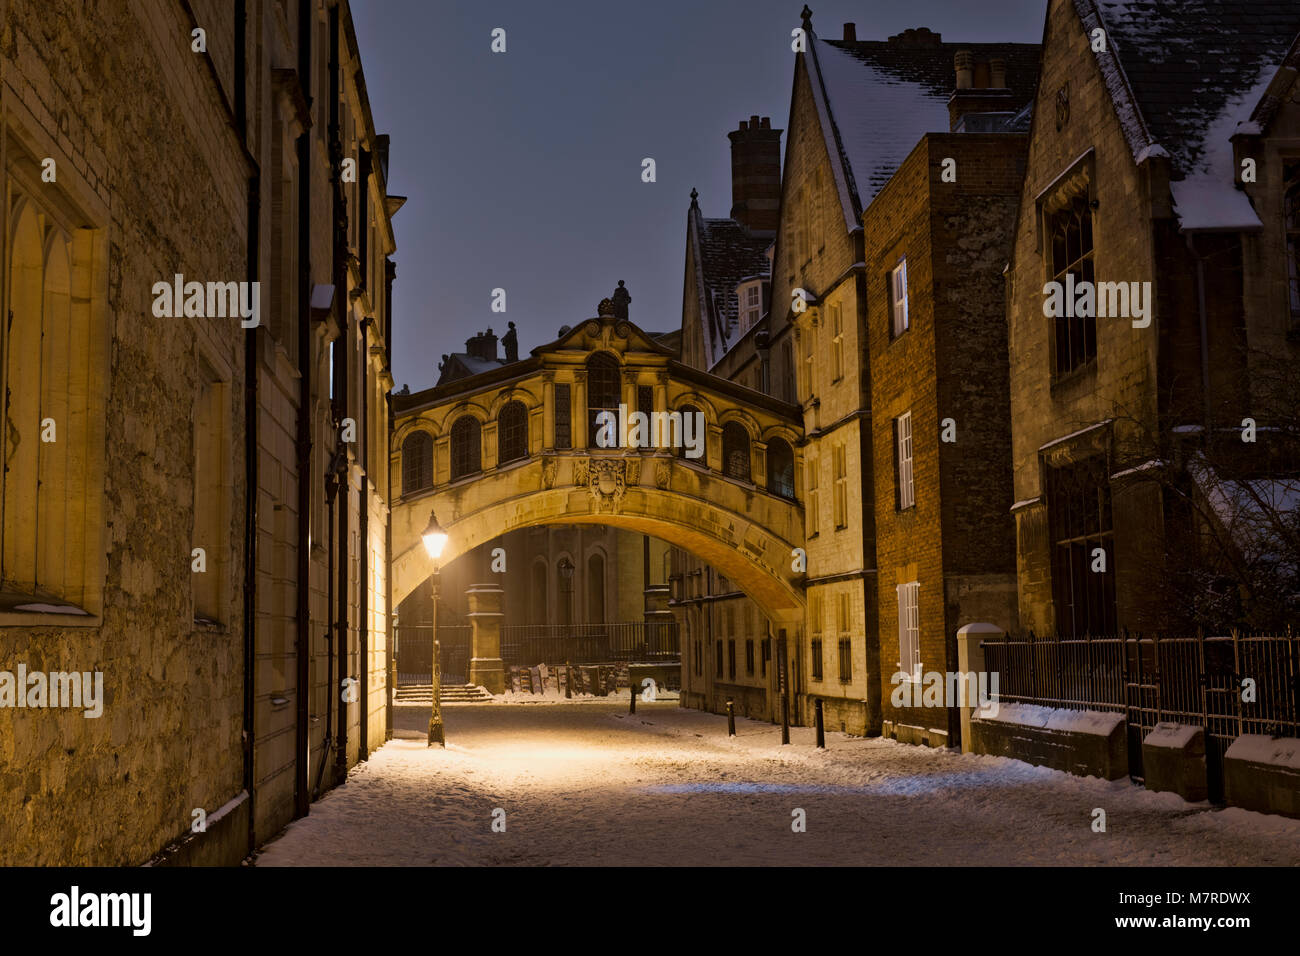 Bridge of Sighs. Hertford bridge in the snow early morning before dawn. Oxford, Oxfordshire, England Stock Photo